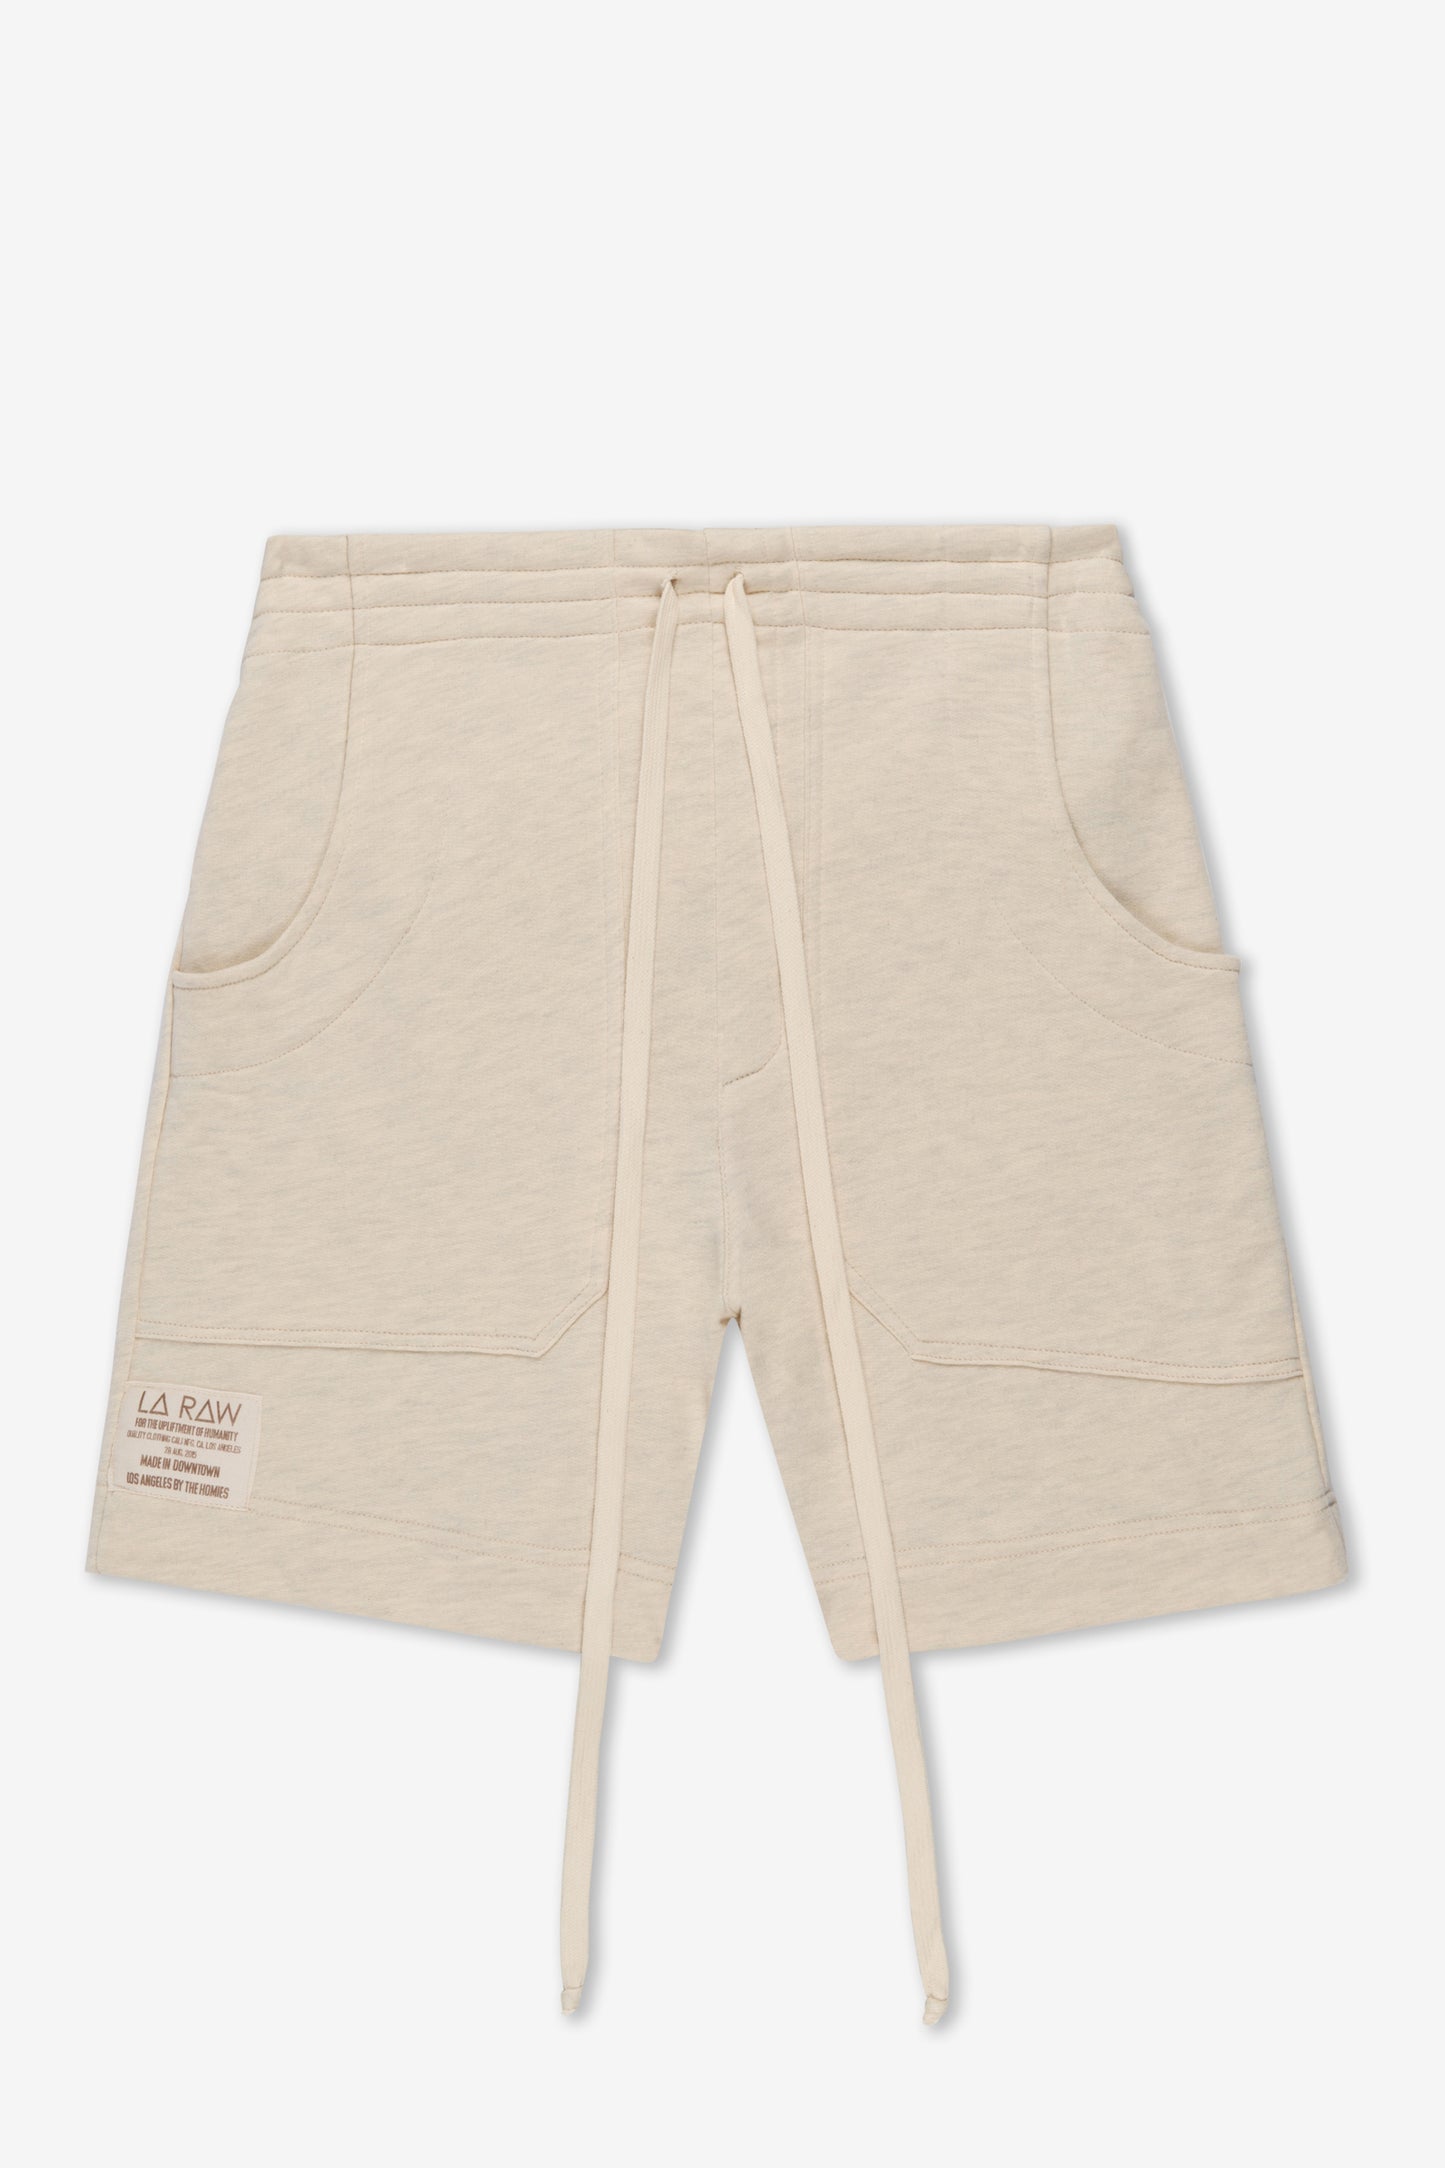 MUDCLOTH FRENCH-TERRY SHORTS